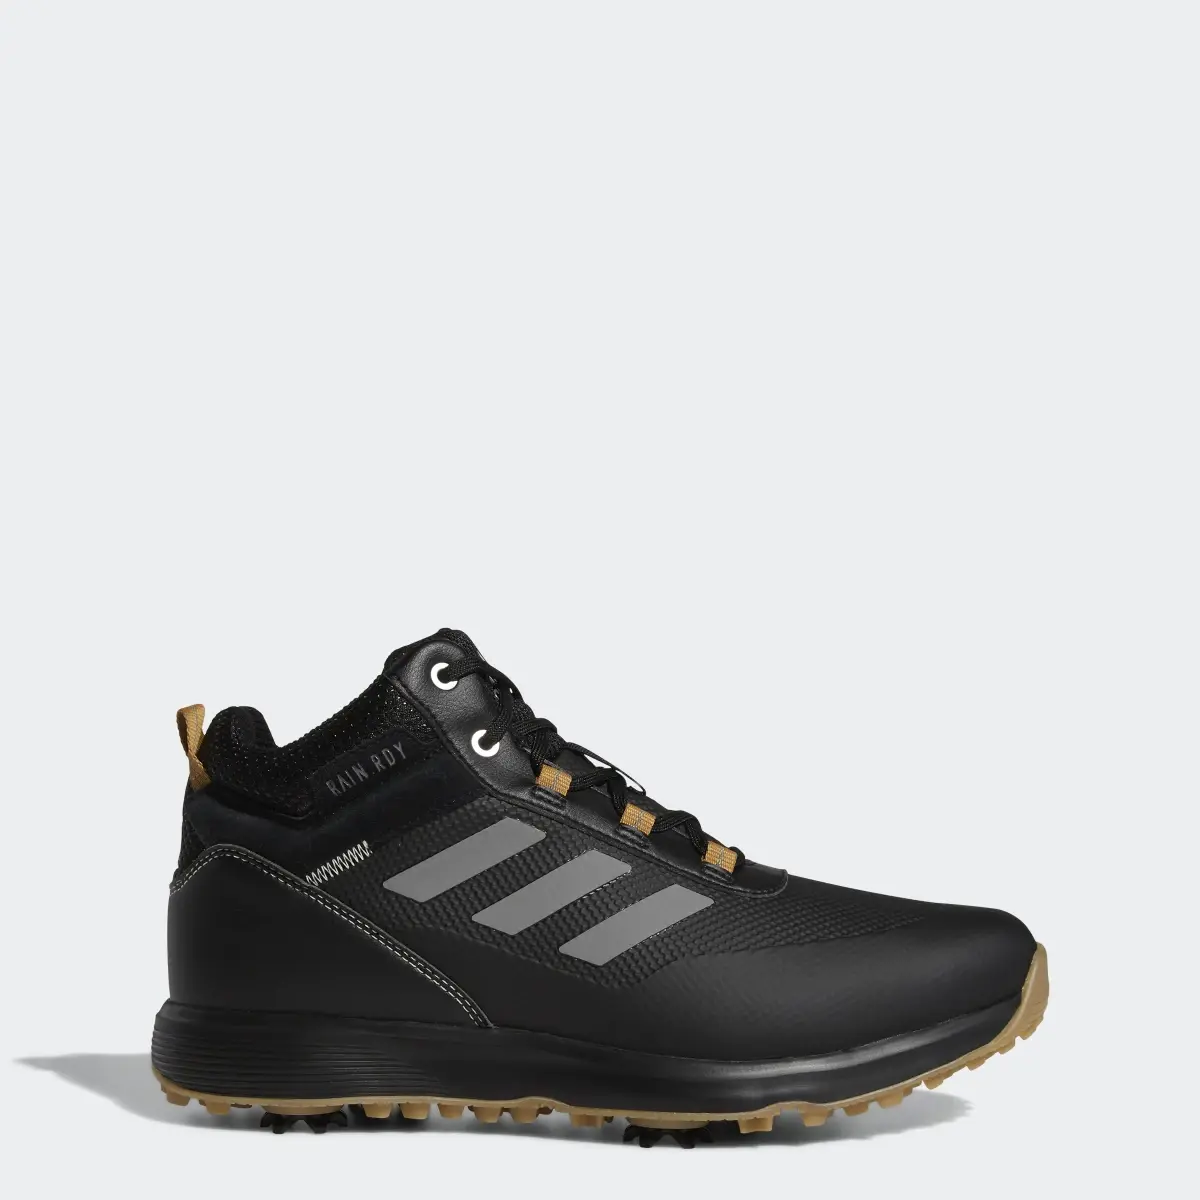 Adidas S2G Recycled Polyester Mid-Cut Golf Shoes. 1